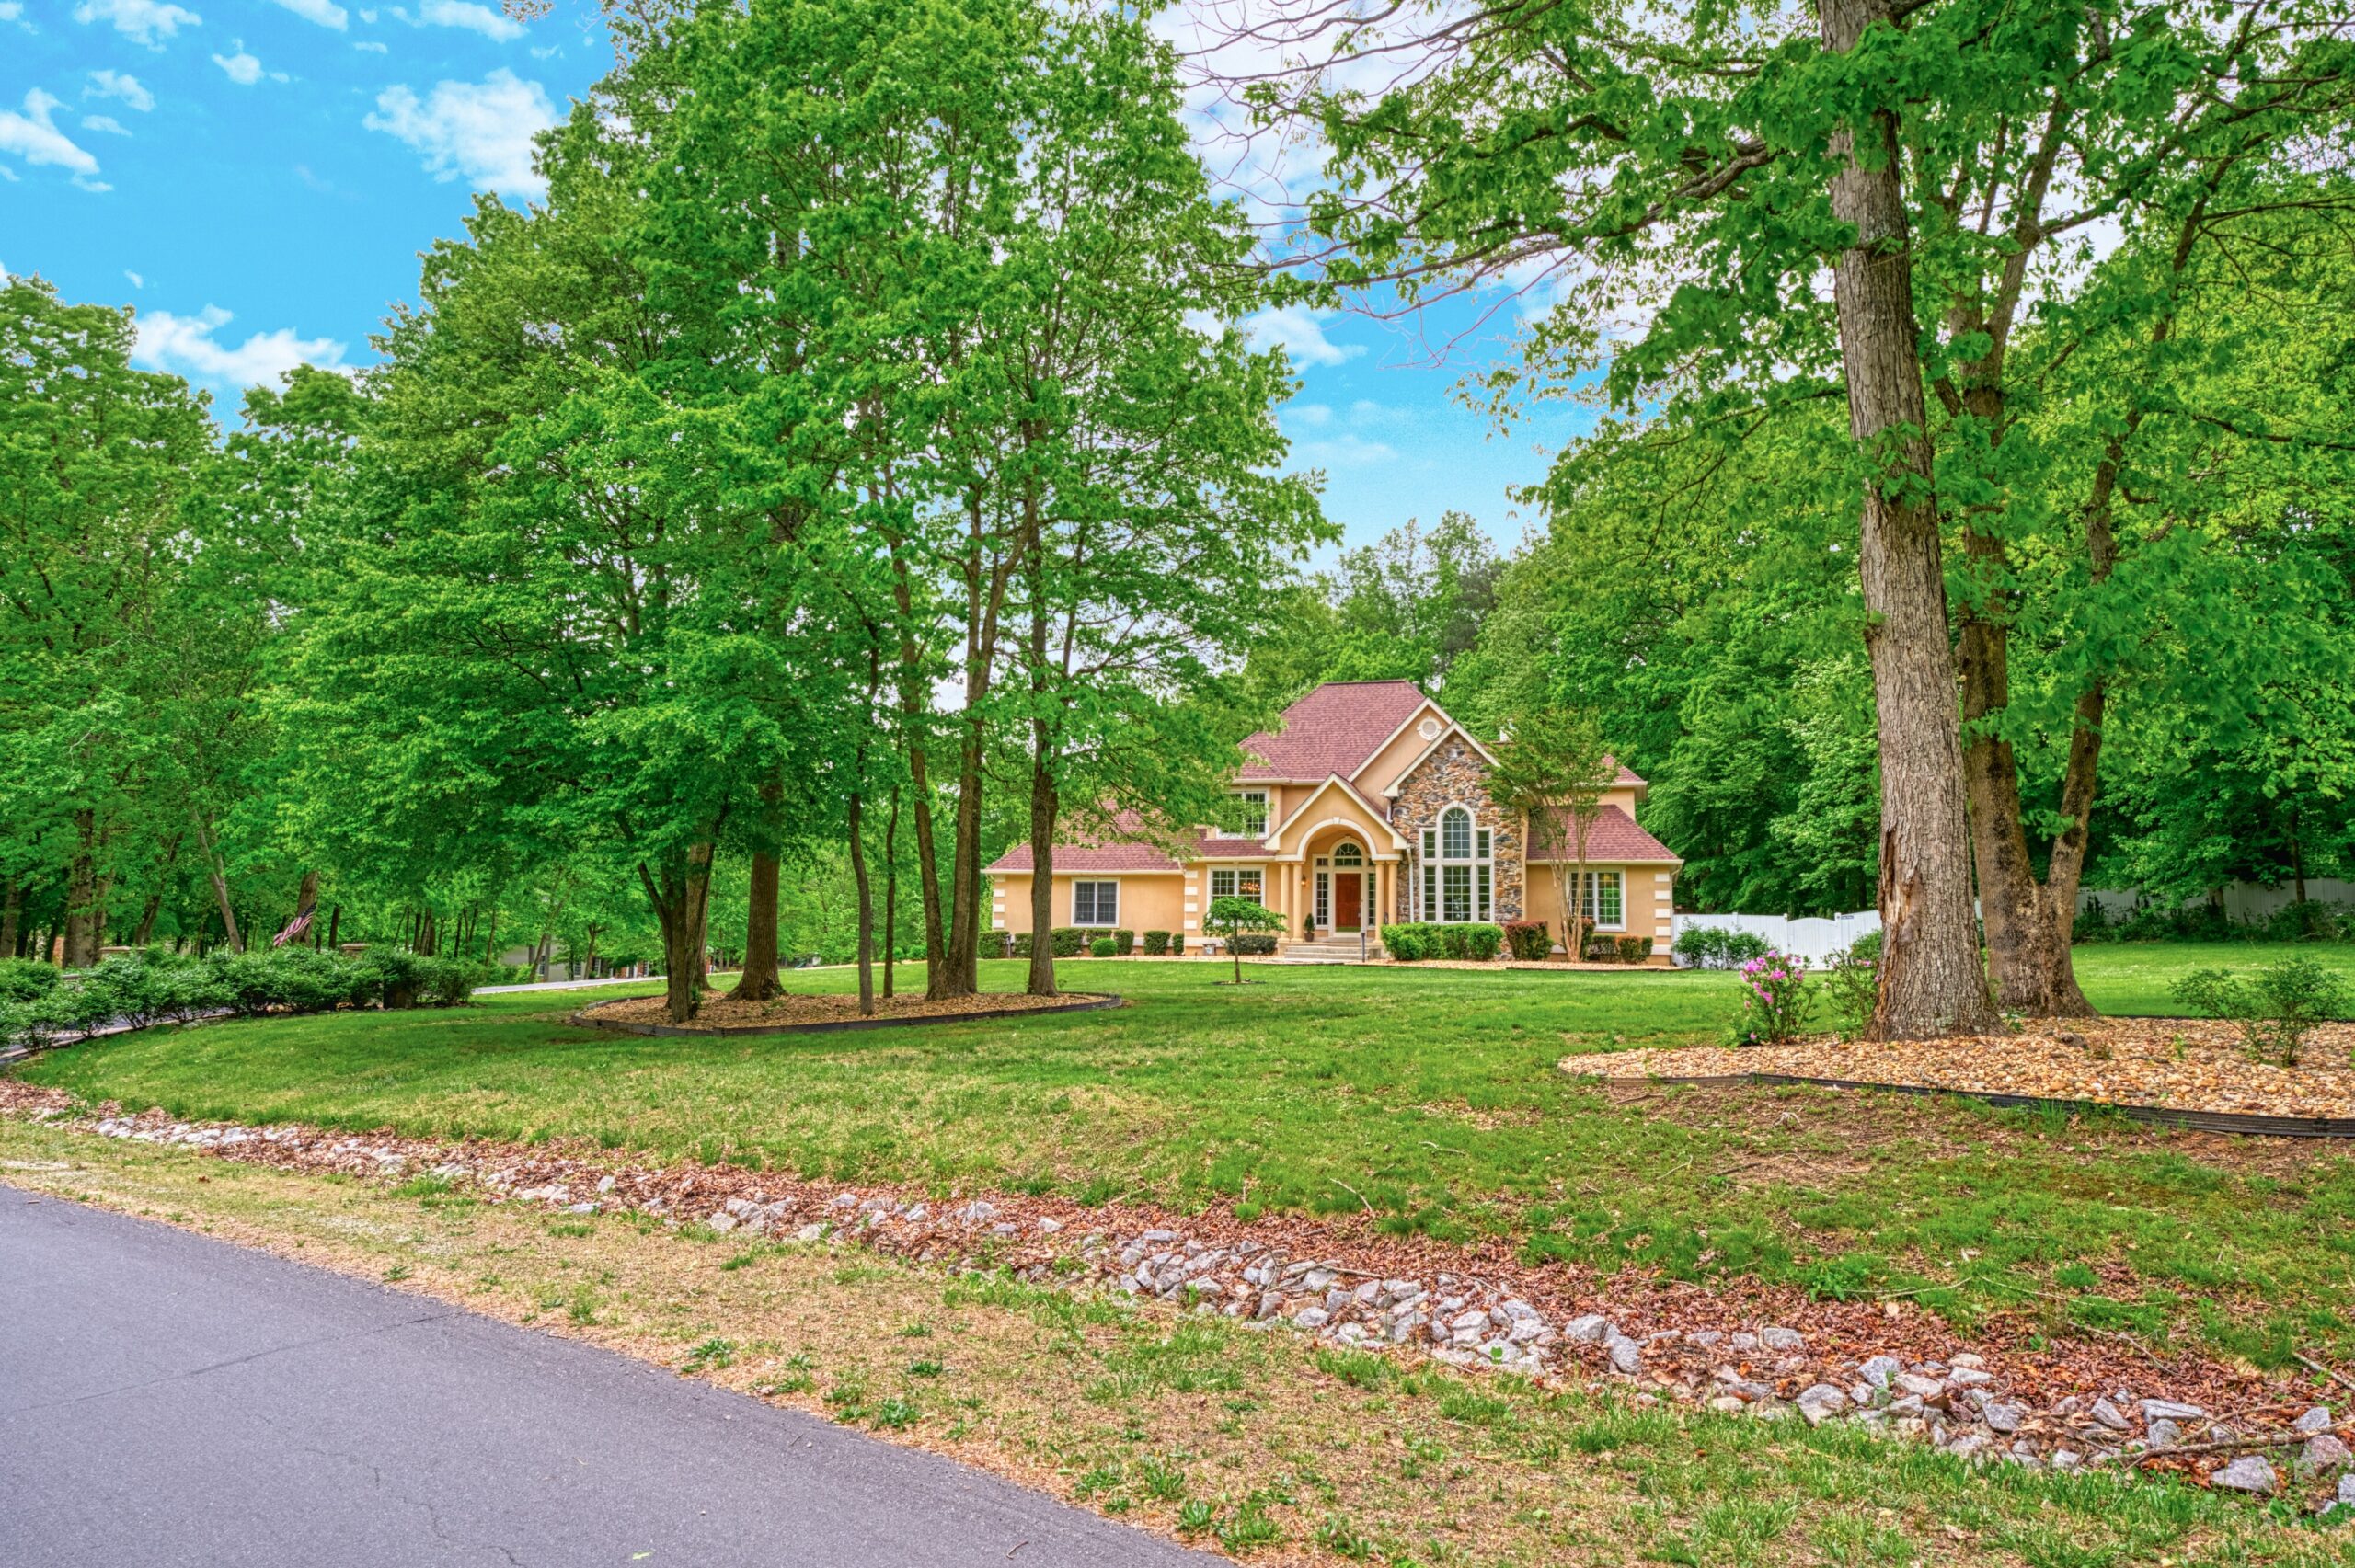 Professional exterior photo of 13700 Holly Forest Dr - from the road showing the front from across the yard, a French countryside style estate home surrounded by mature trees at the back